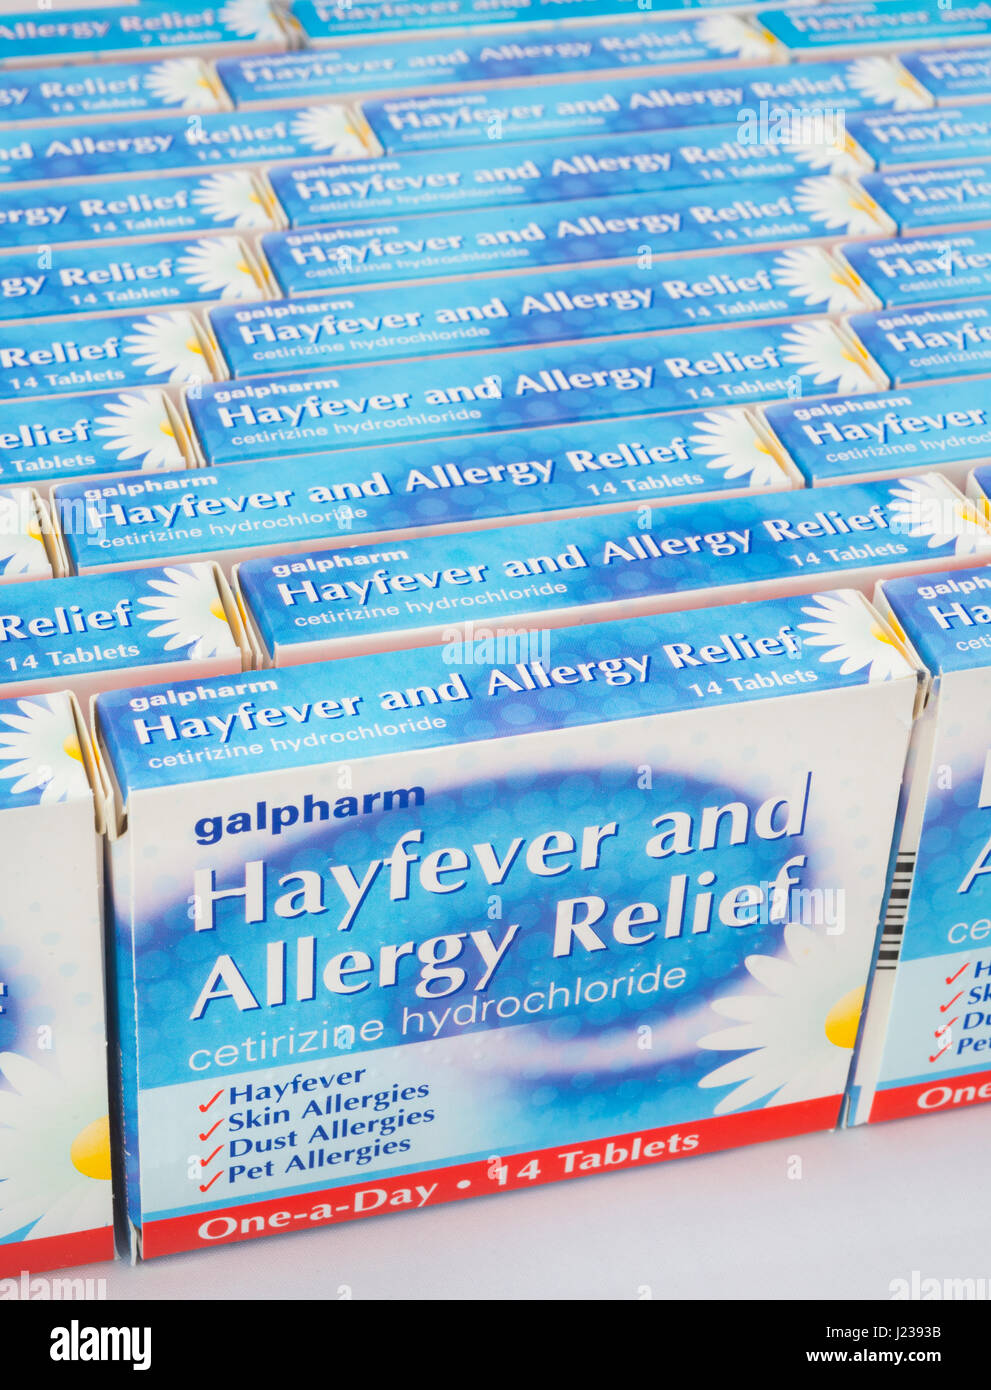 Hayfever and allergy relief tablets. Stock Photo